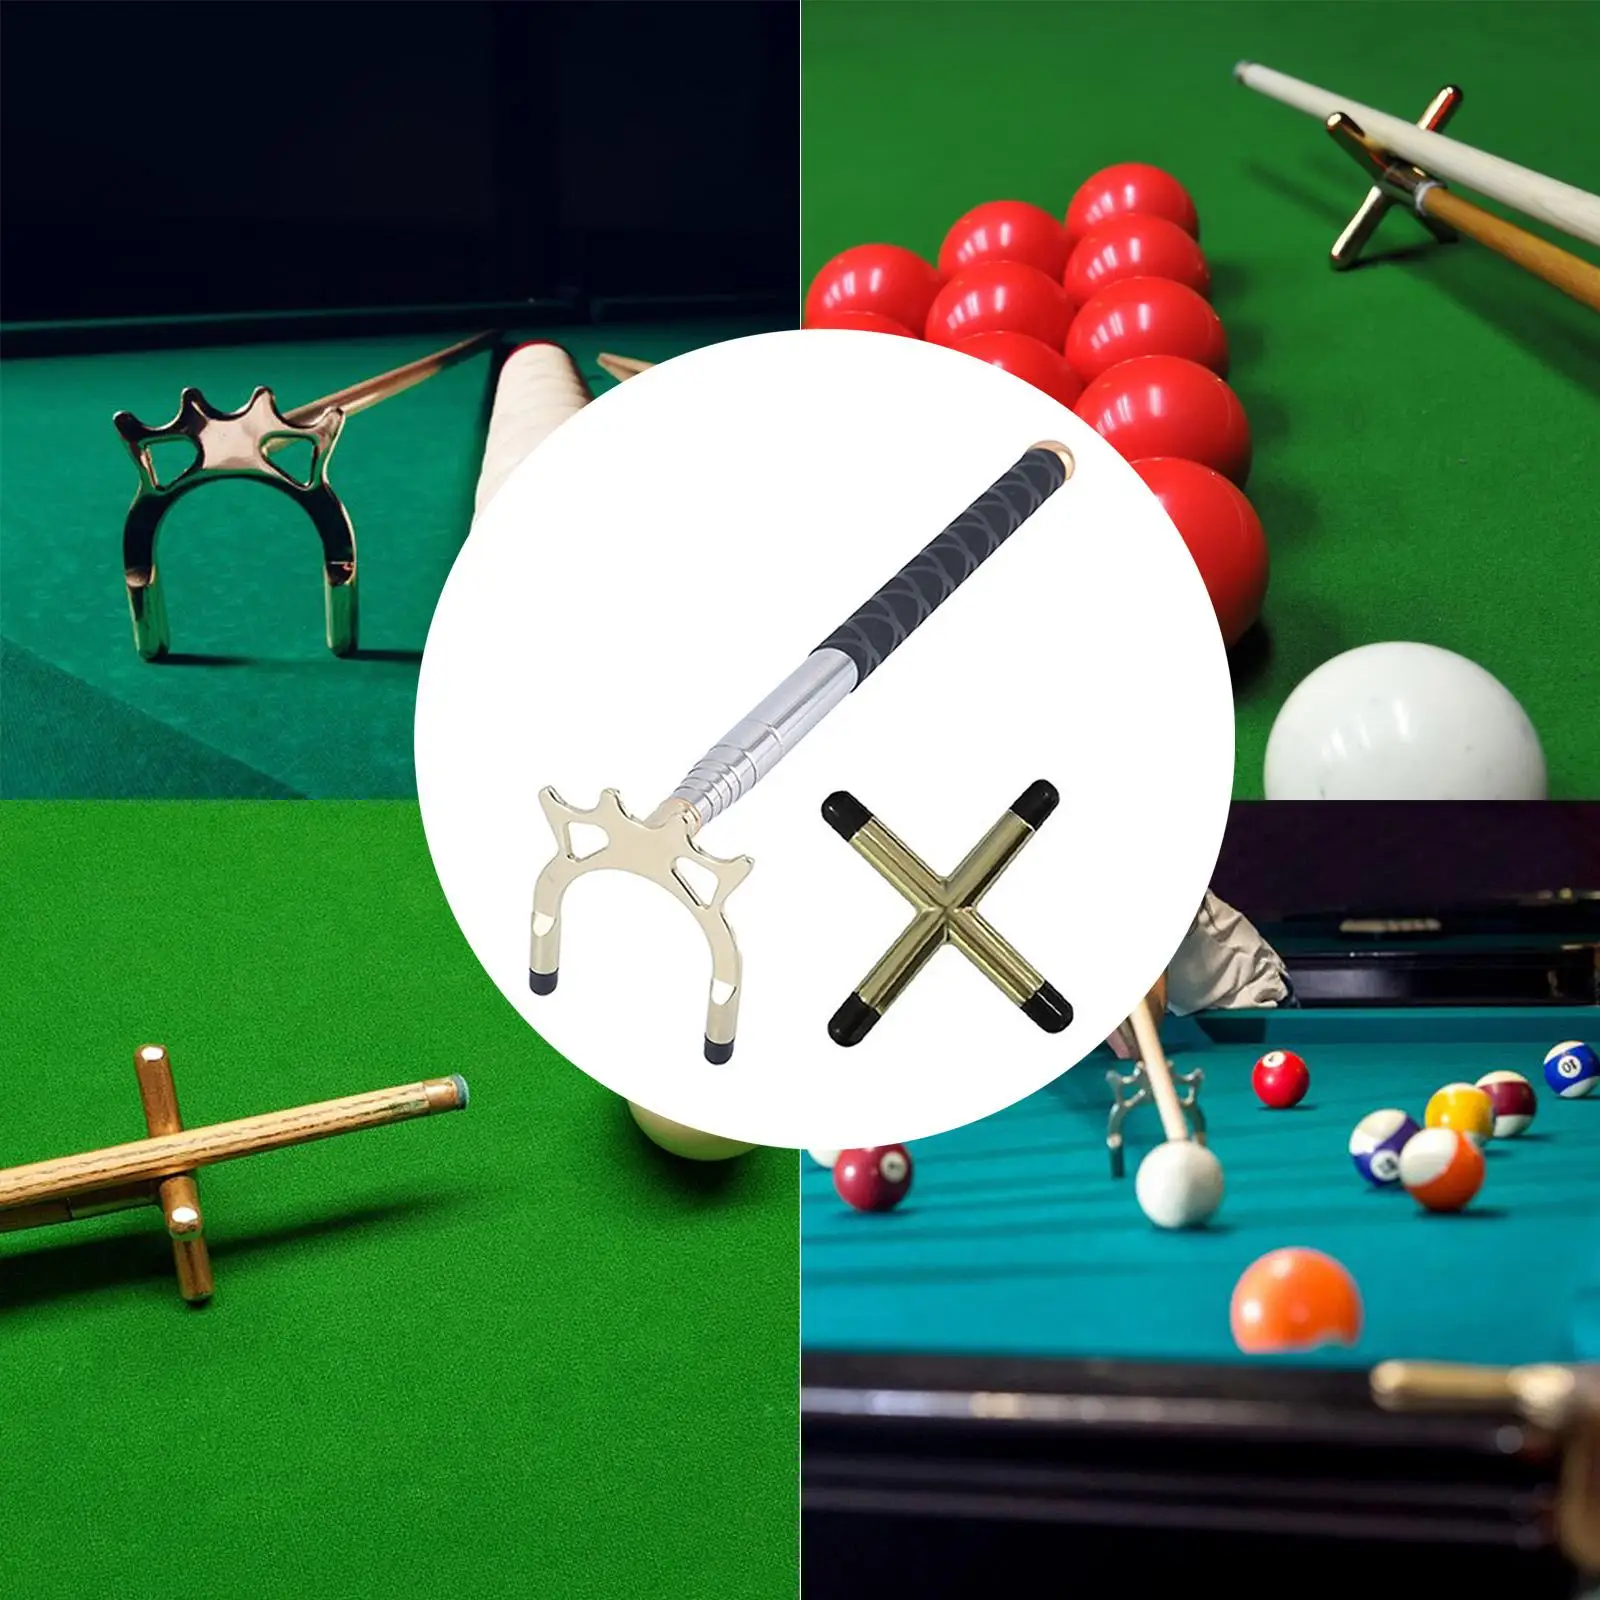 Durable Billiards Pool Cue Bridge Stick with Bridge Head Retractable Stainless Steel Replacement for Playing Pool Table Snooker